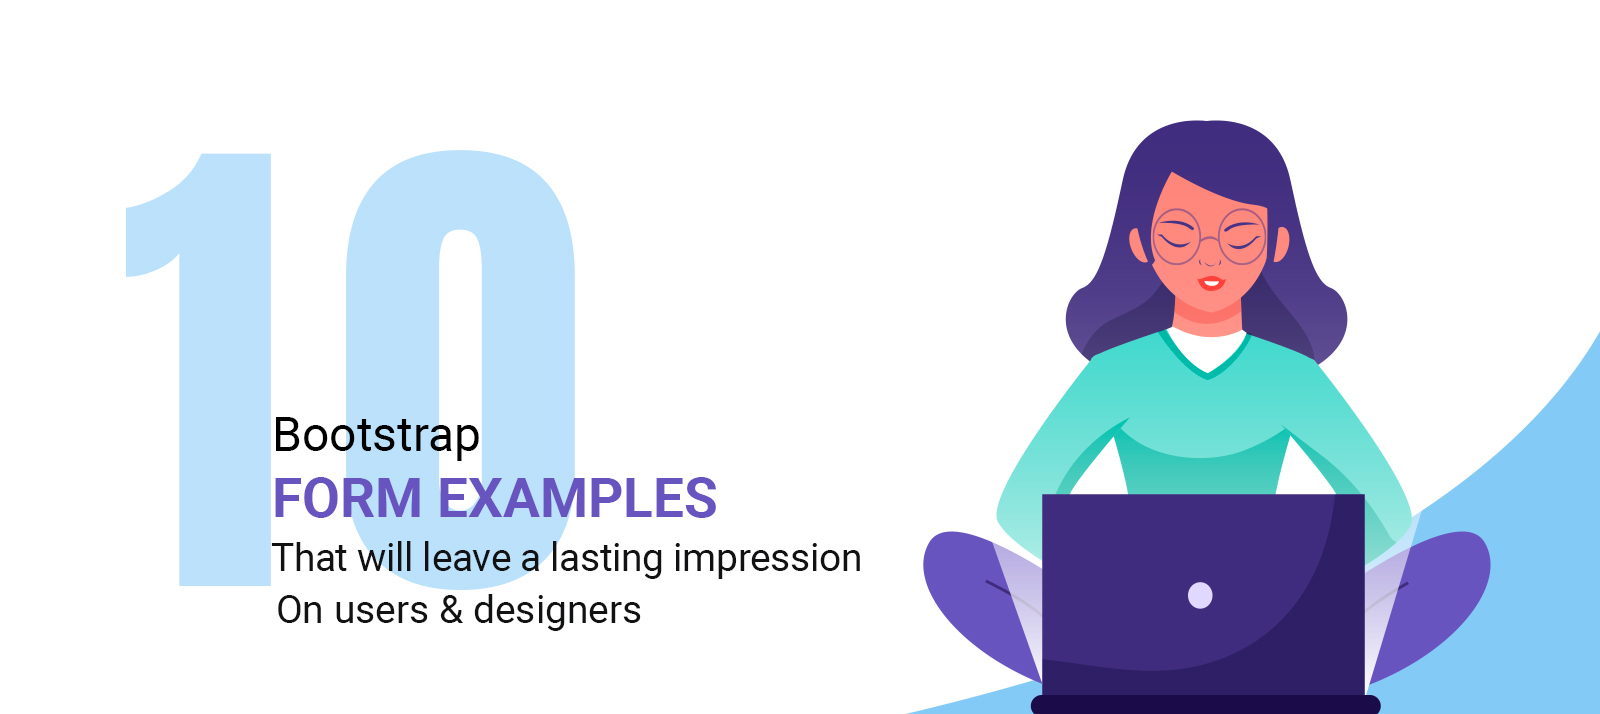  12 Bootstrap Form Examples That Will Leave a Lasting Impression on Users and Designers